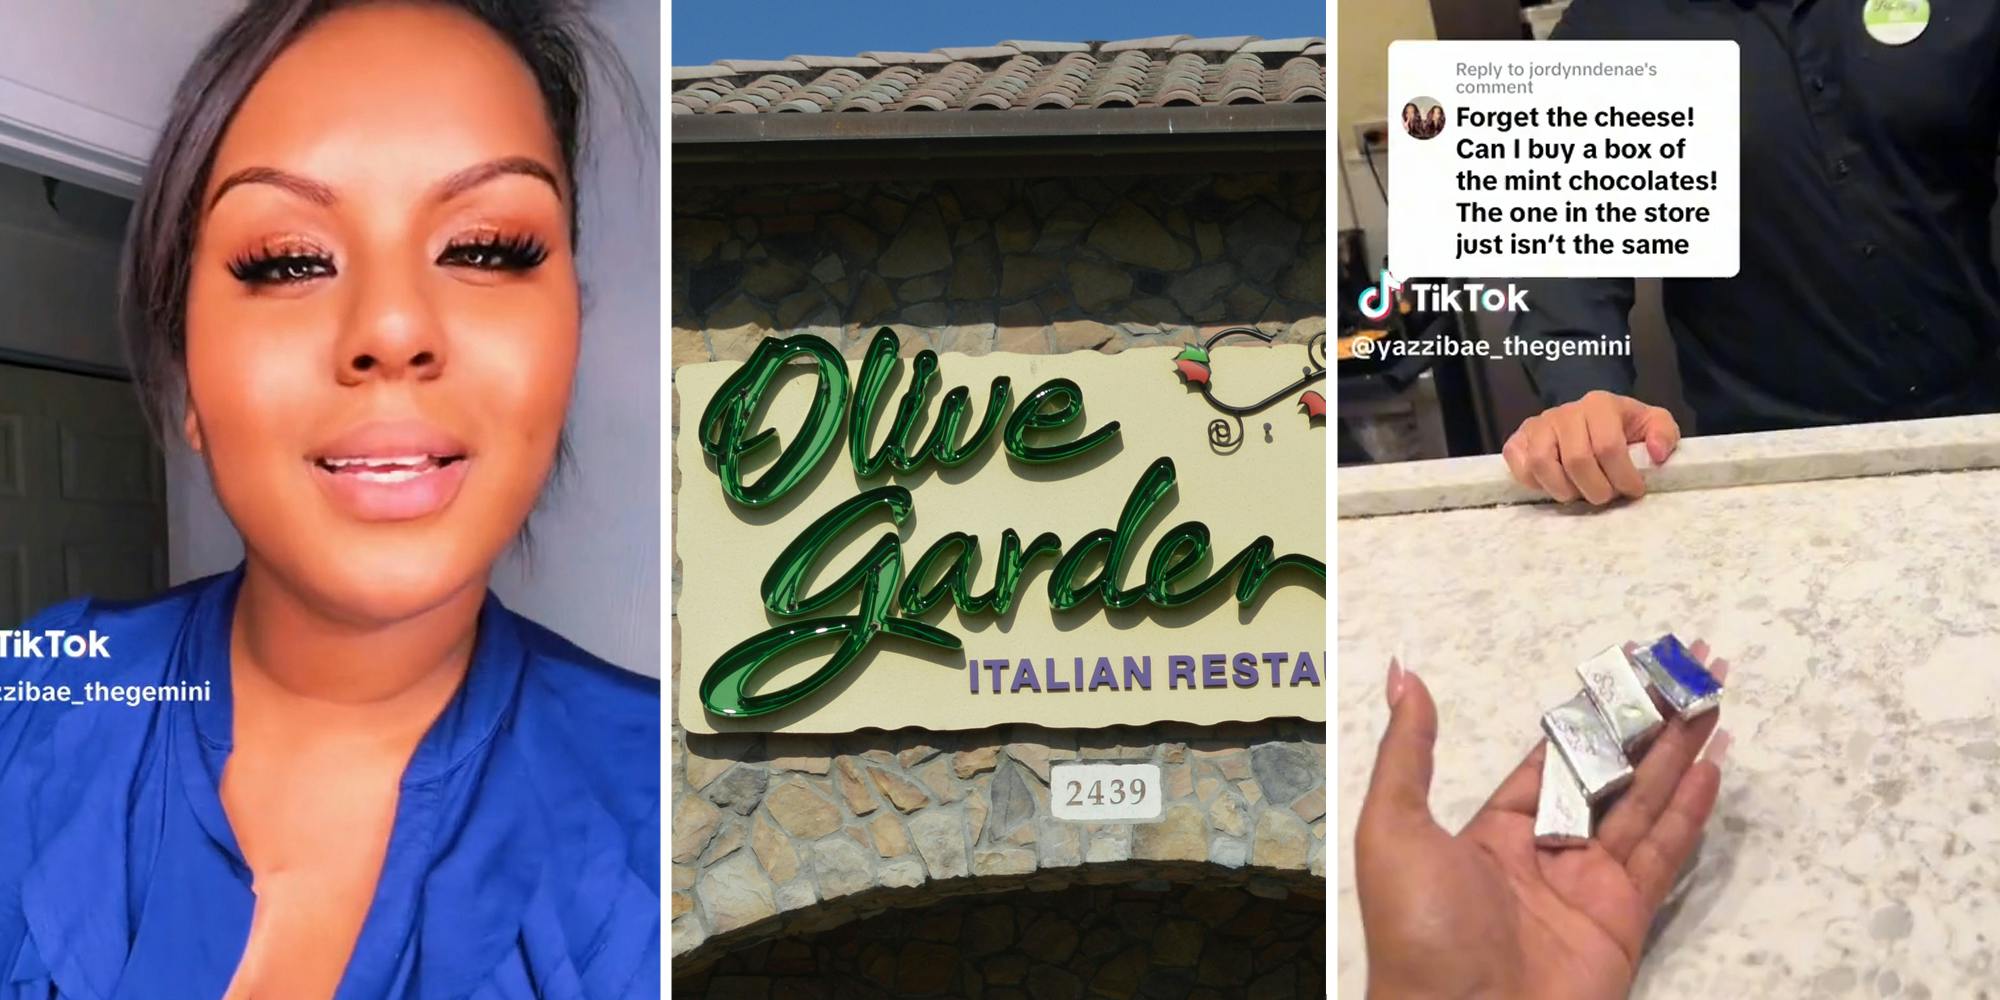 Olive Garden Diner Confirms You Can Buy Their Chocolate Mints